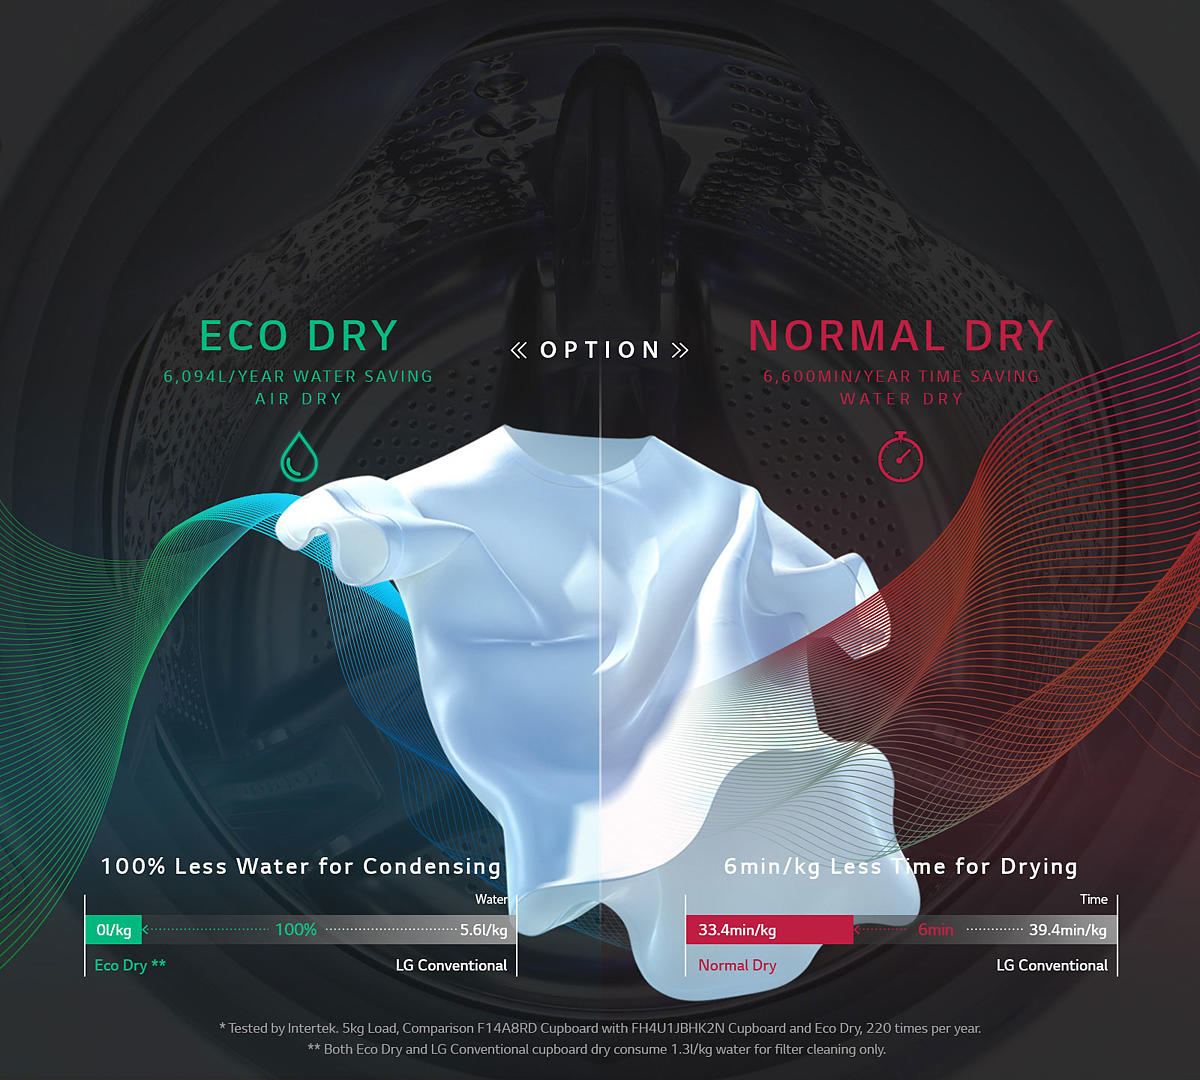 SAVE WATER, SAVE TIME with Eco Hybrid